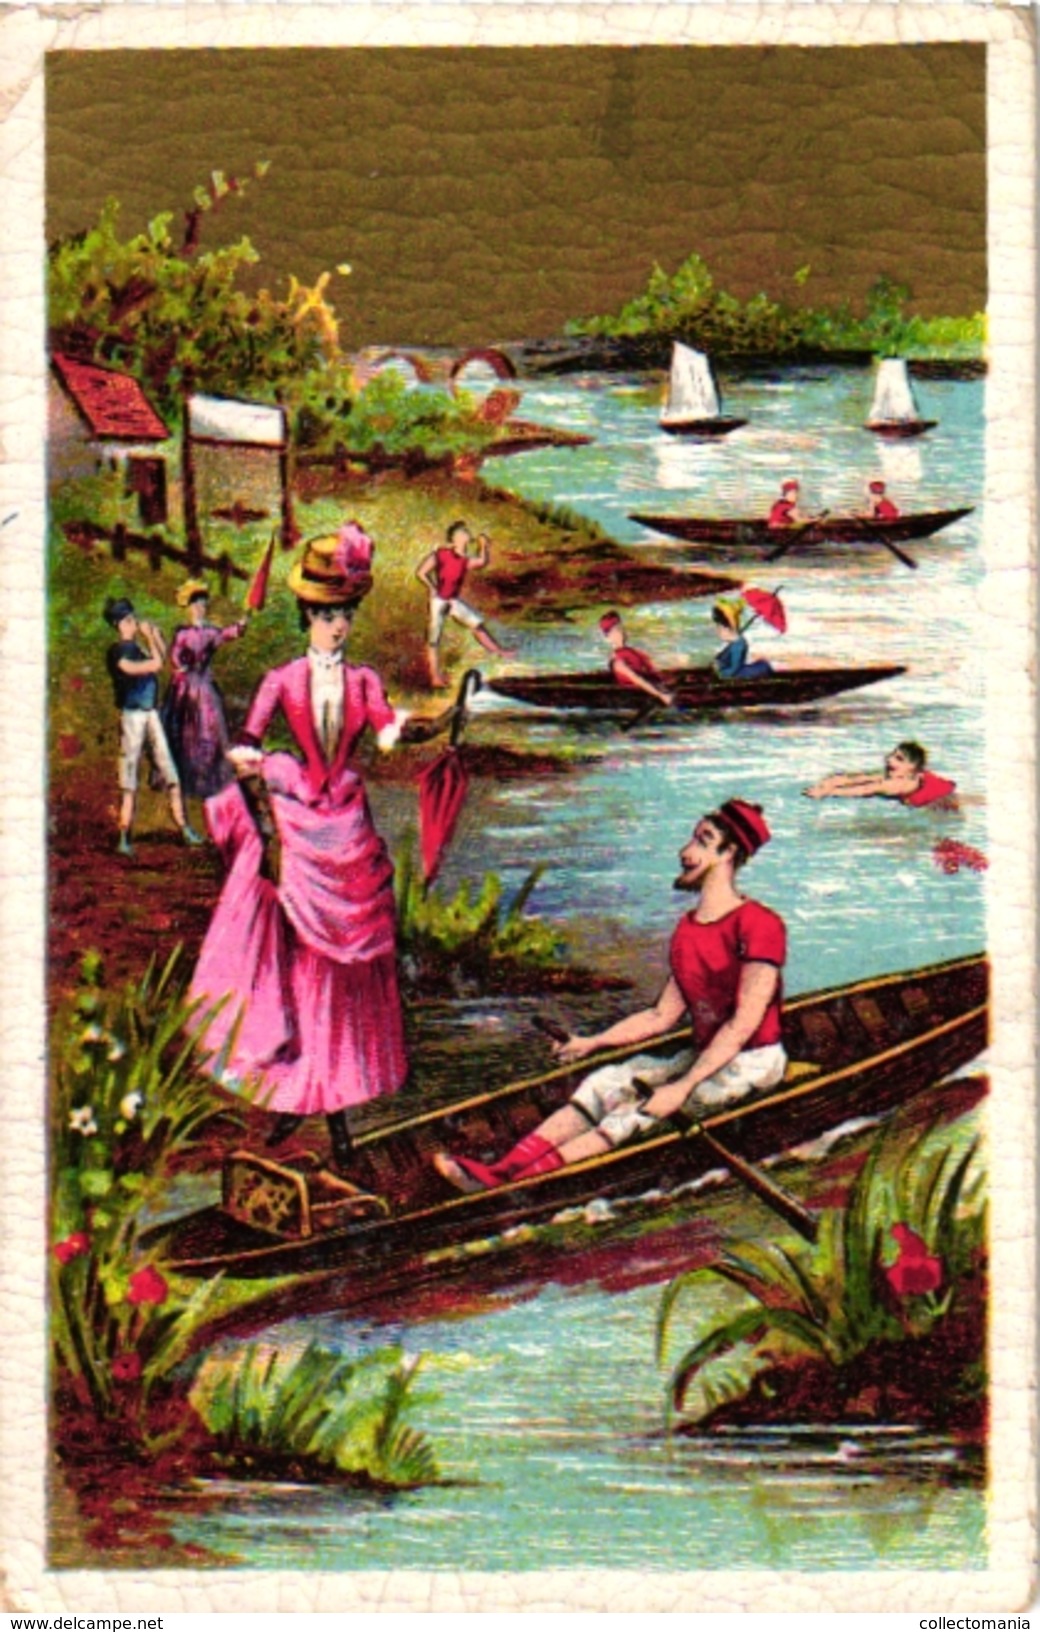 4 Trade Cards Chromo Rowing Canotage Regatta Skiff Sculling  Pub Bruxelles Lille  Choc Guérin Boutron ImpHérold Mertens - Remo